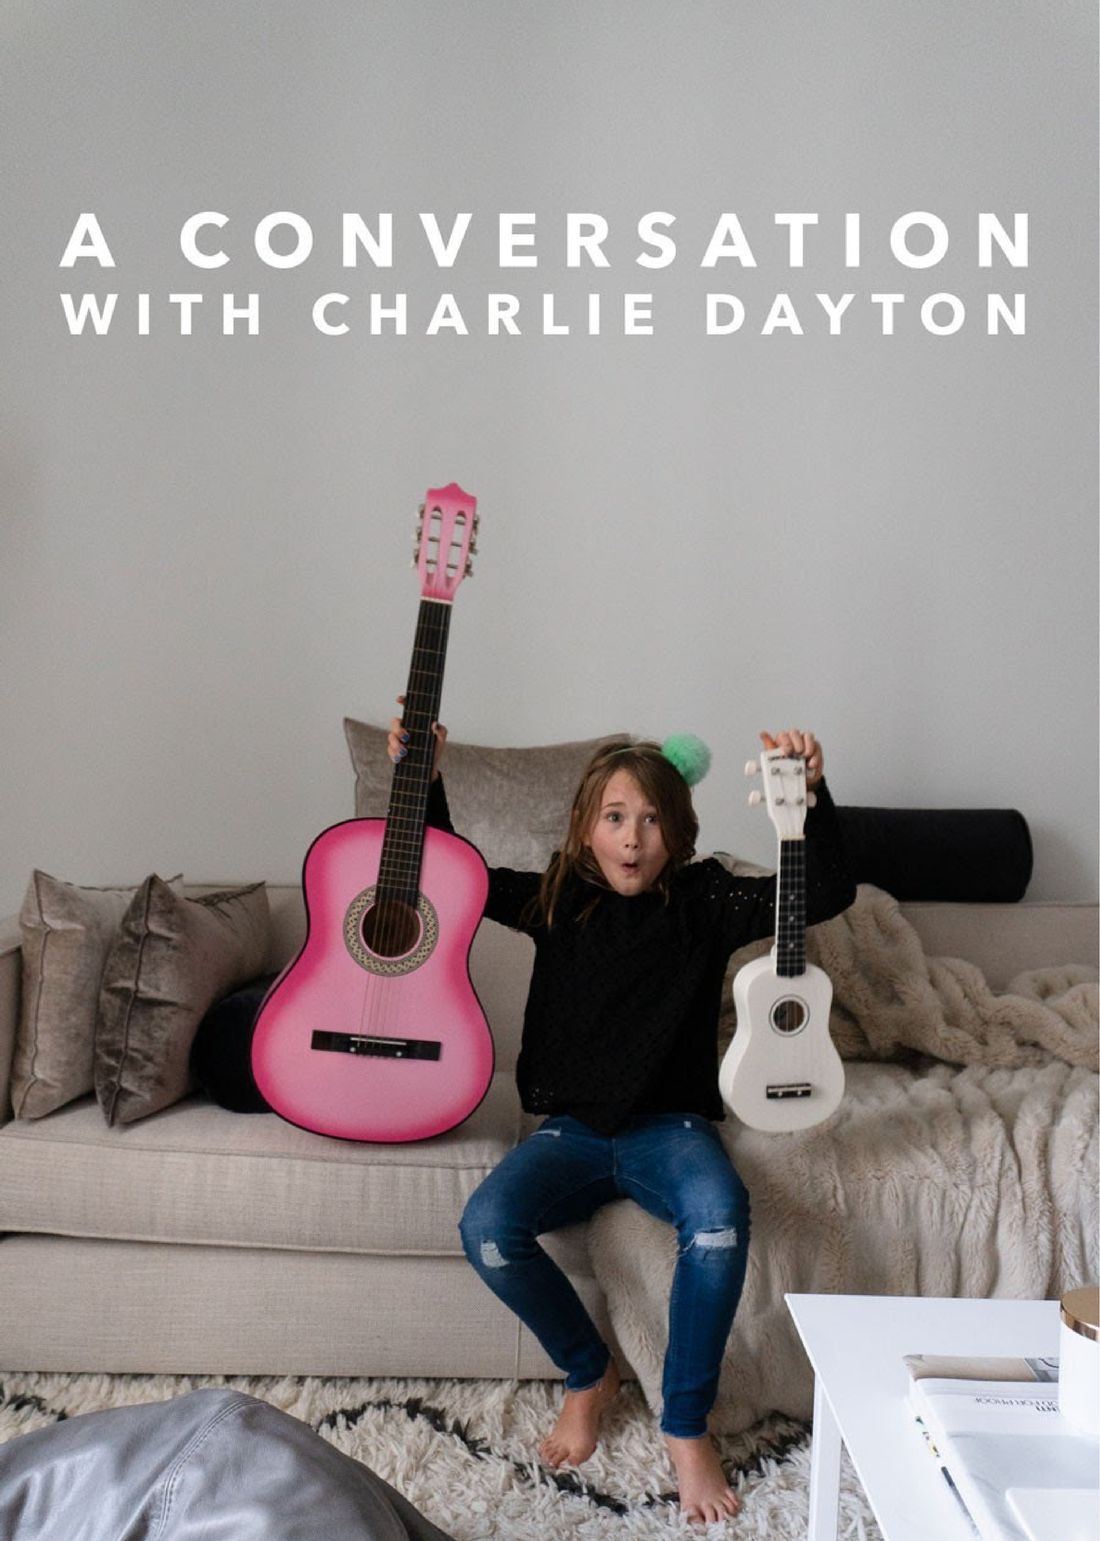 A Conversation with Charlie Dayton